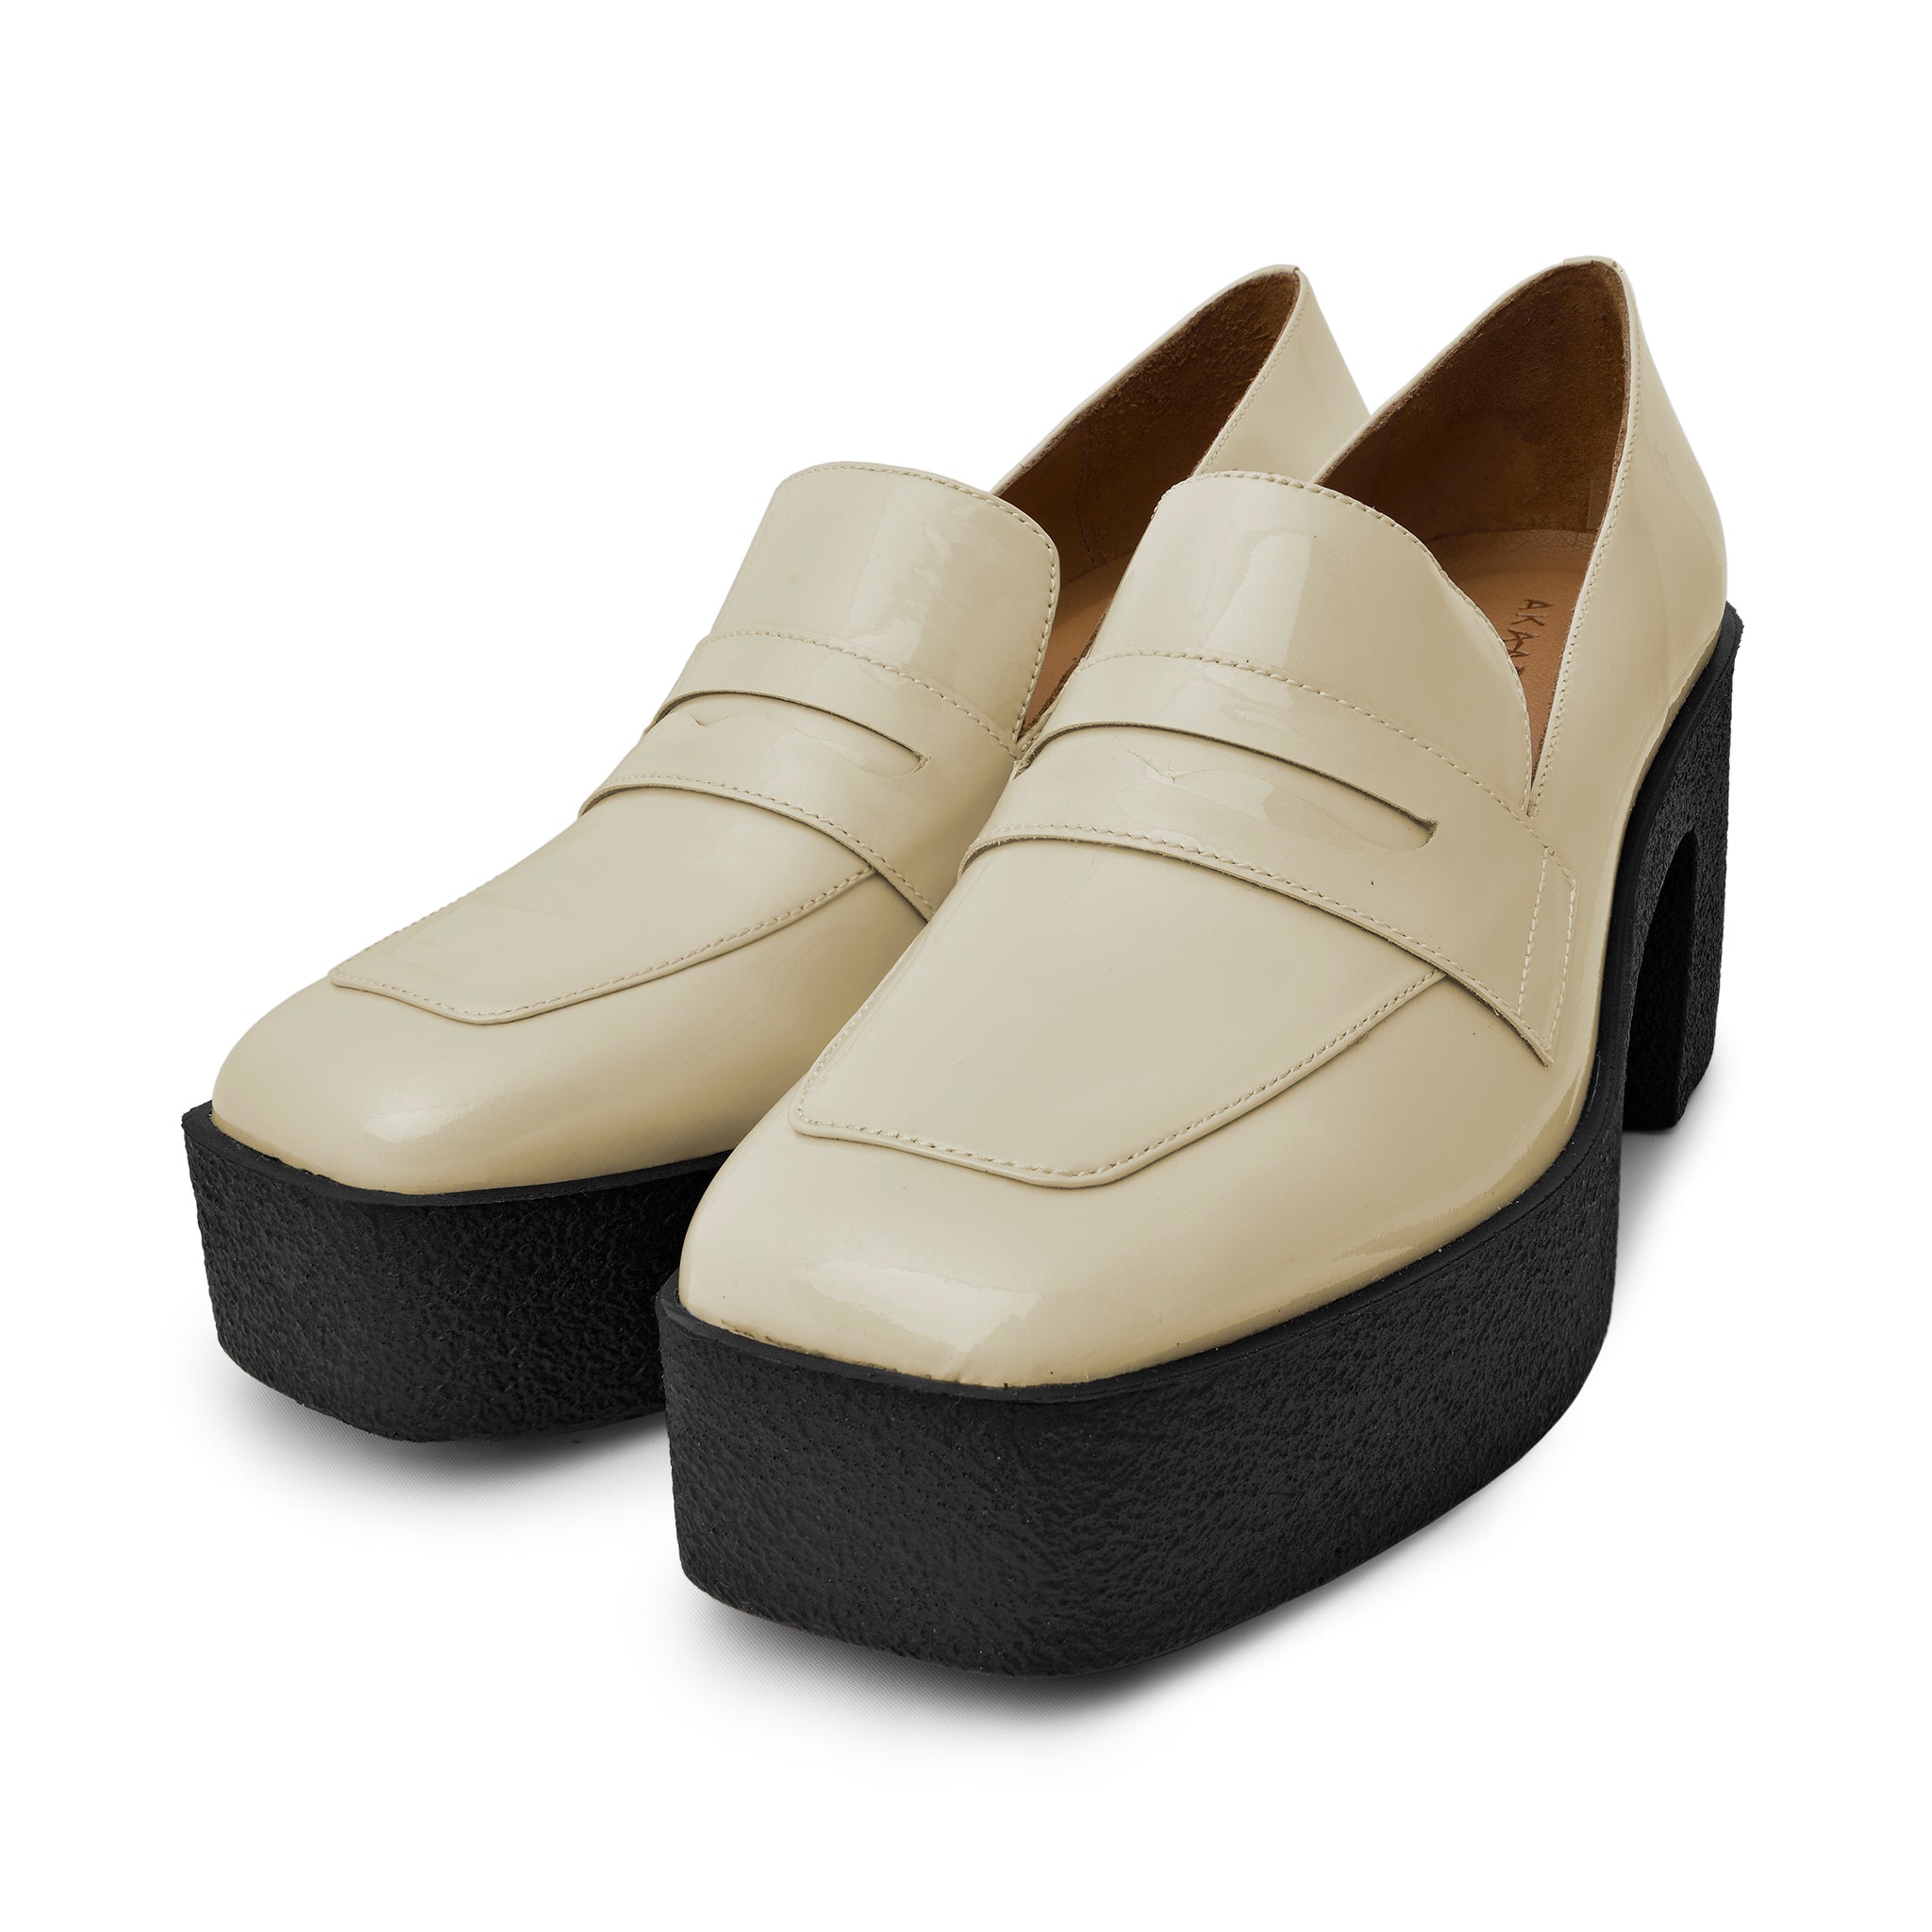 Yoko Cream Patent Leather Chunky Loafers 21031-01-03 -9